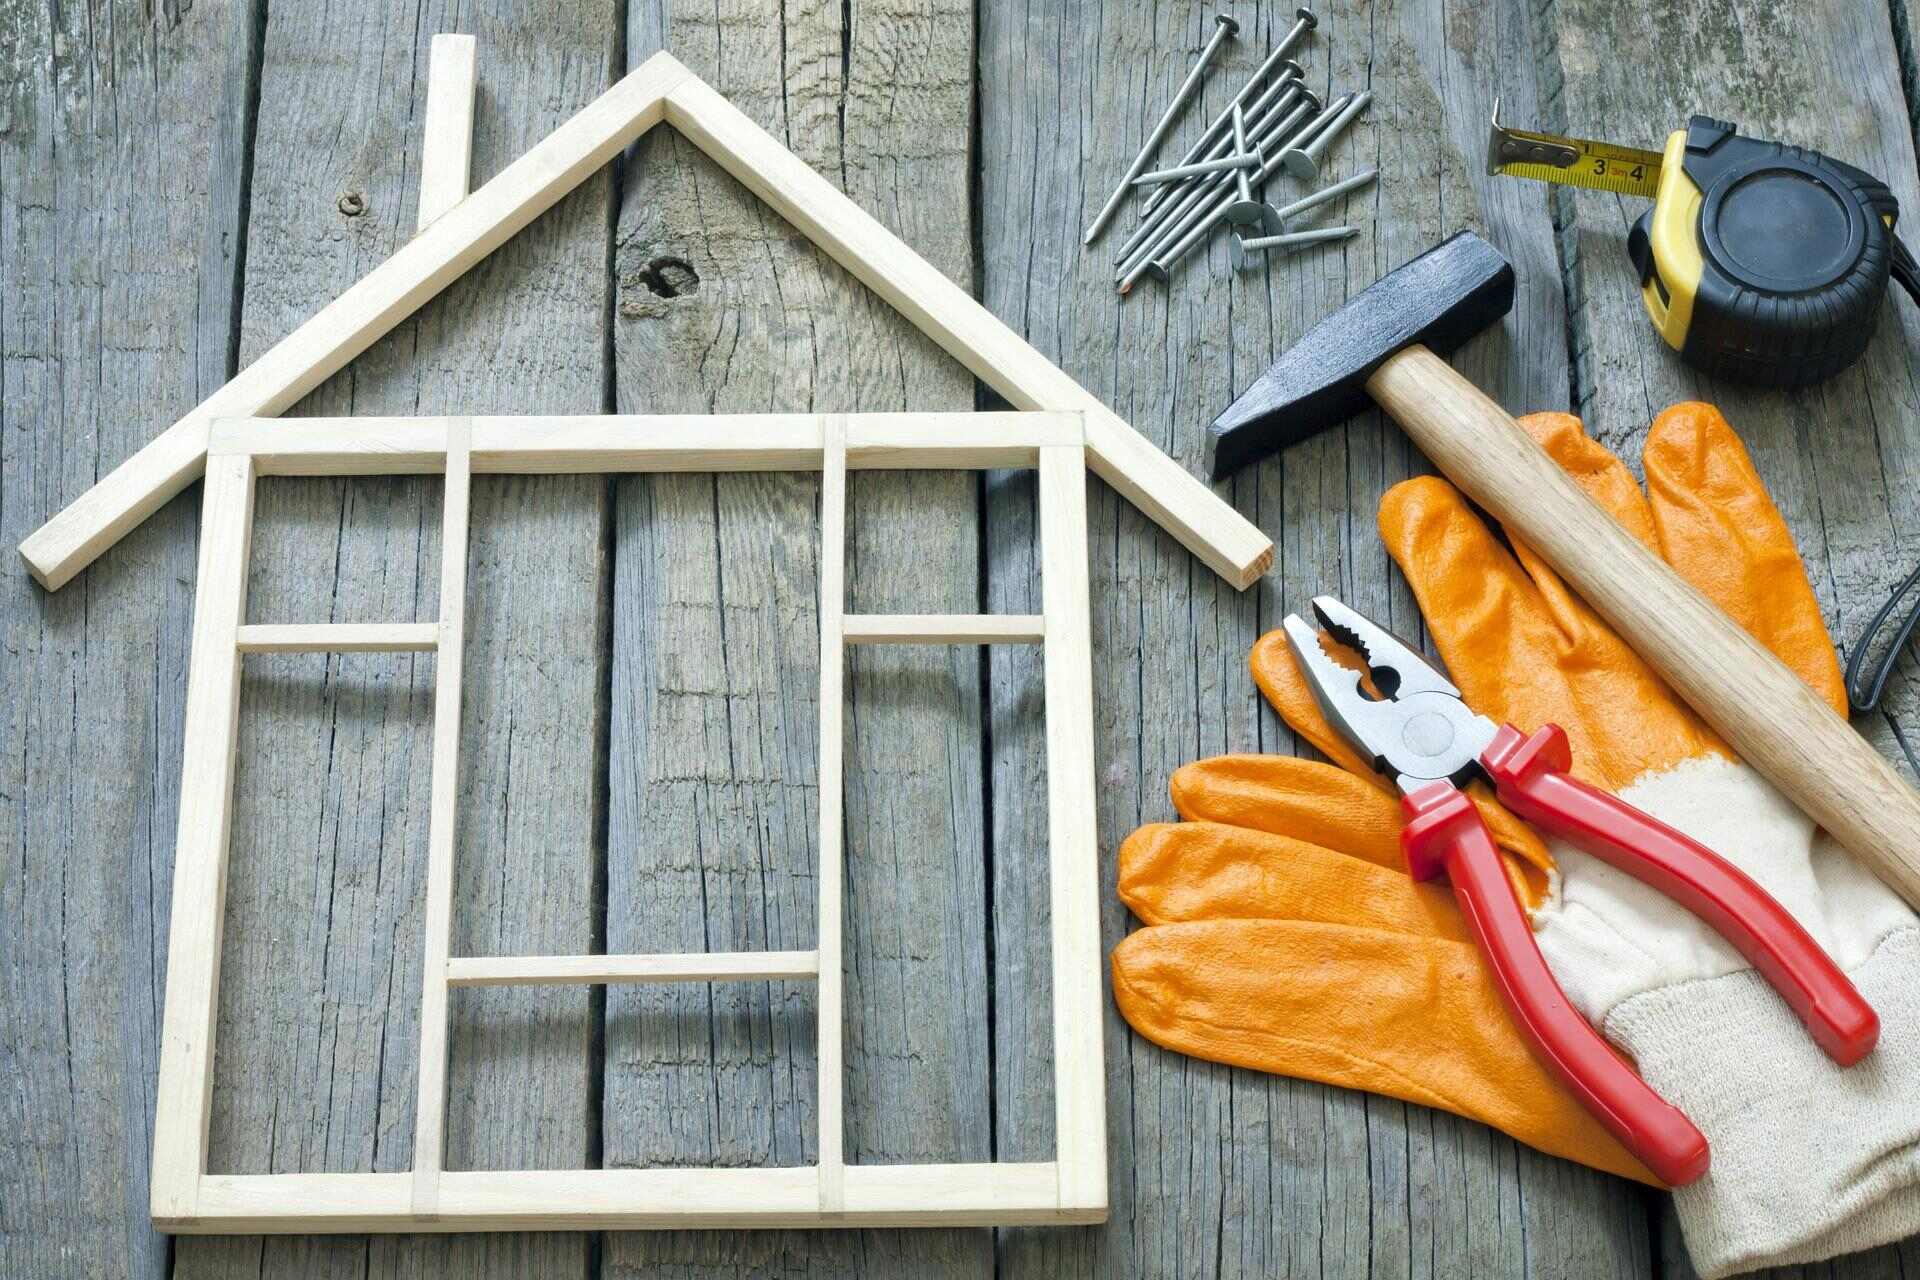 What Do You Need For Home Improvements?